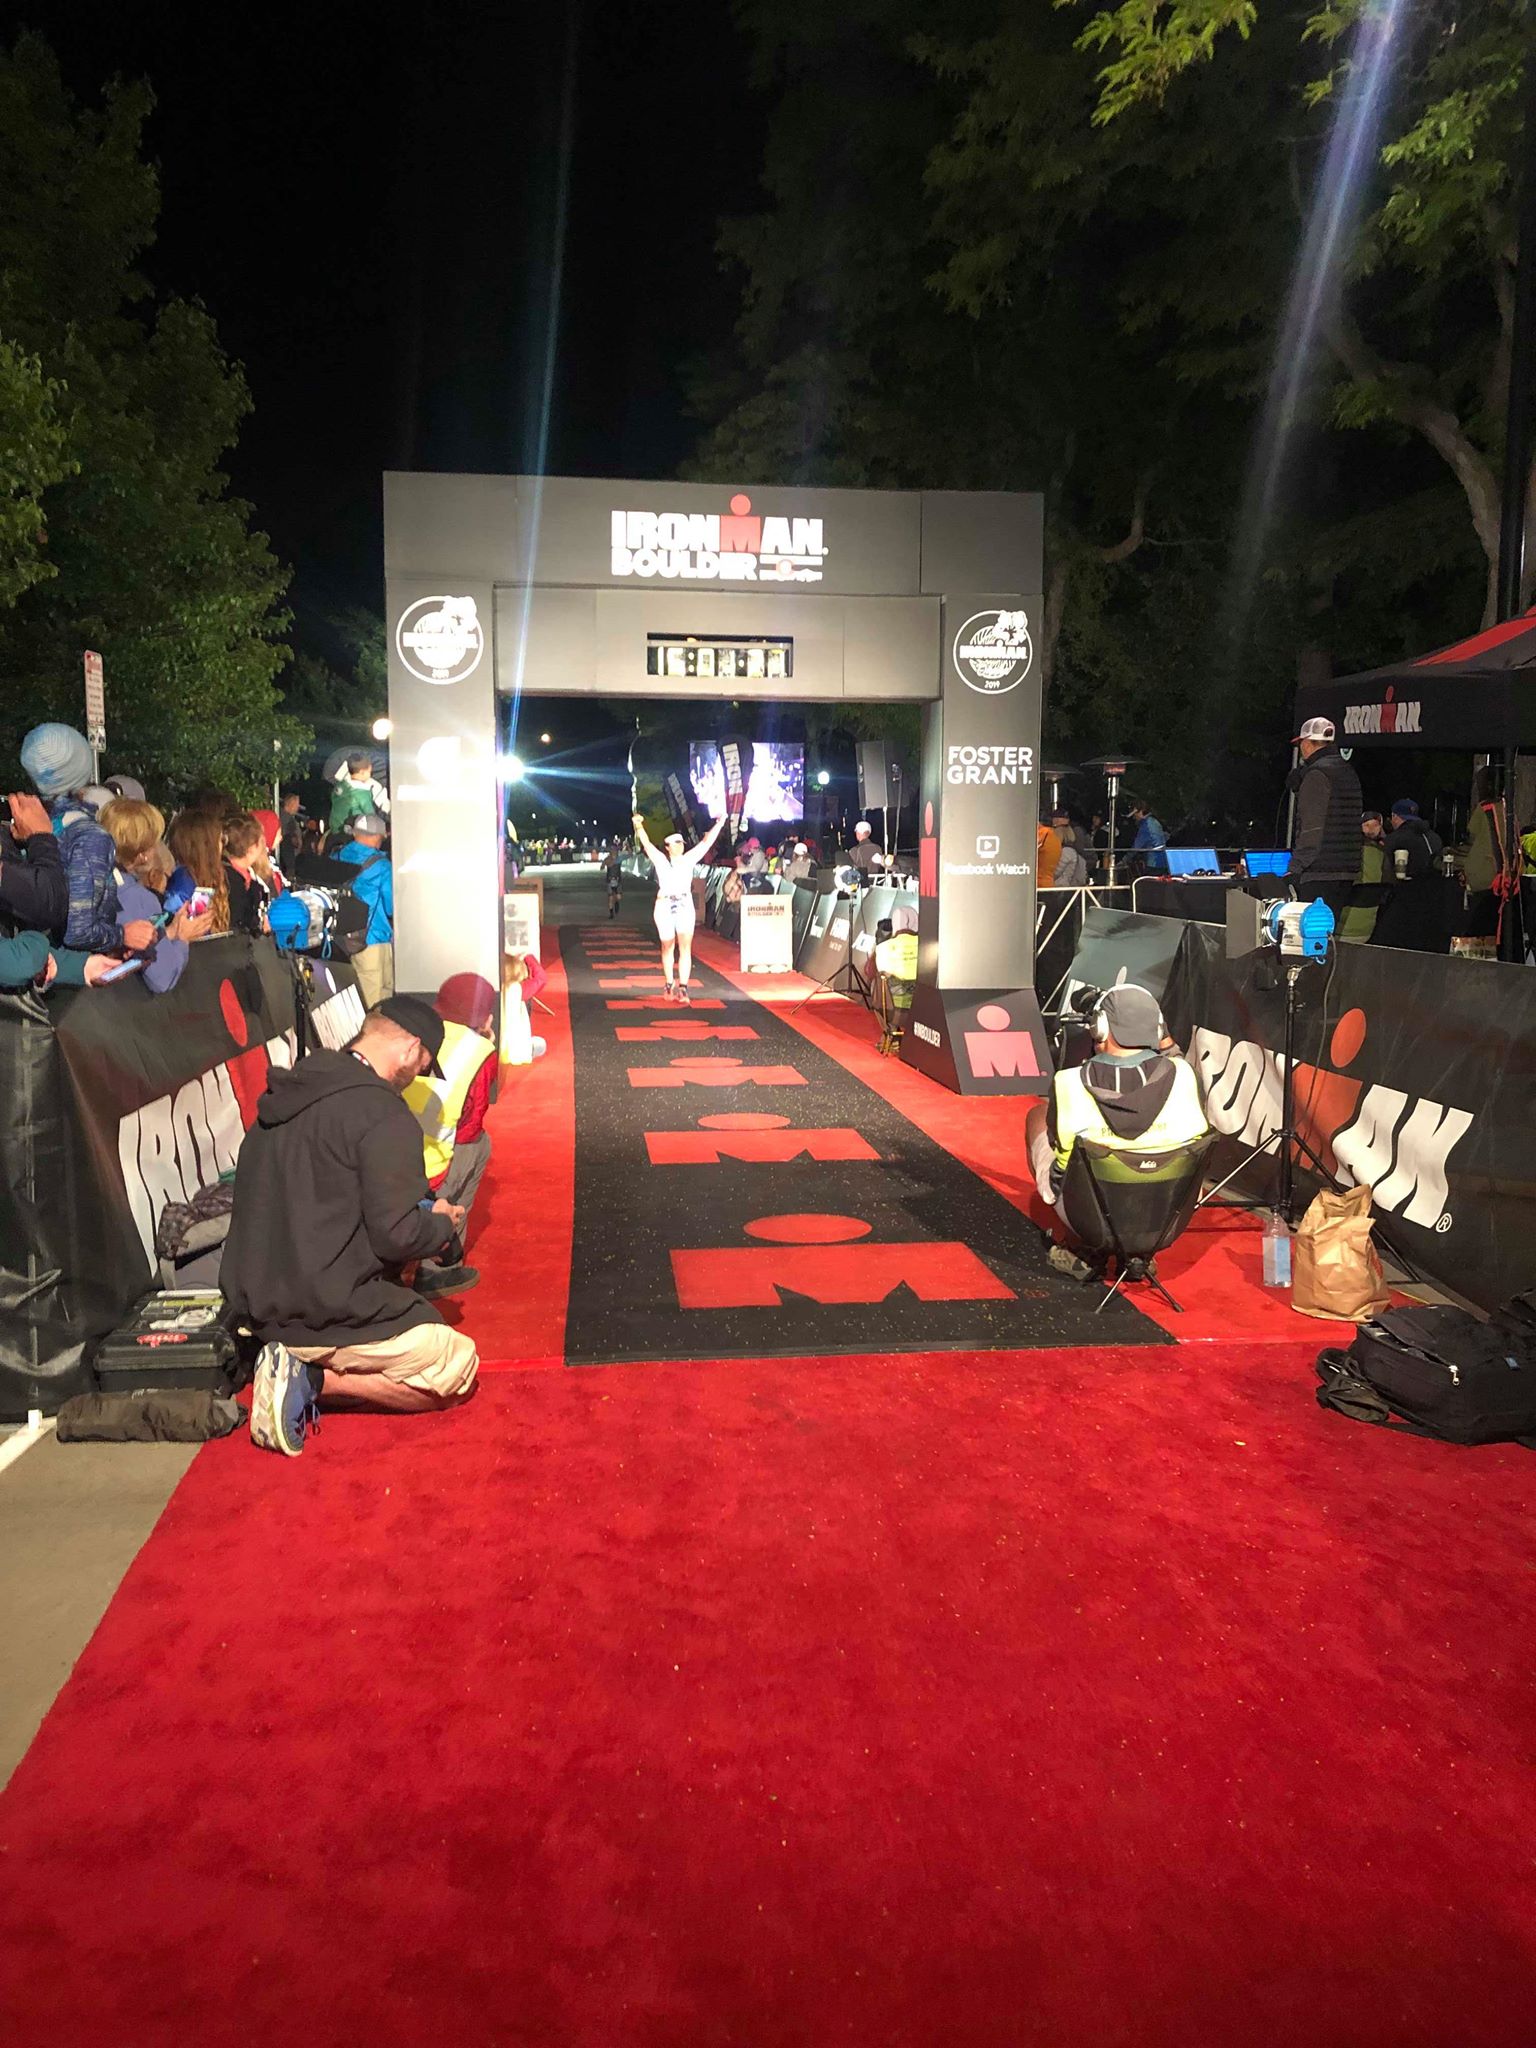 Coach_Terry_Wilson_Pursuit_of_The_Perfect_Race_IRONMAN_Boulder_Ashley_Drayer_13.jpg